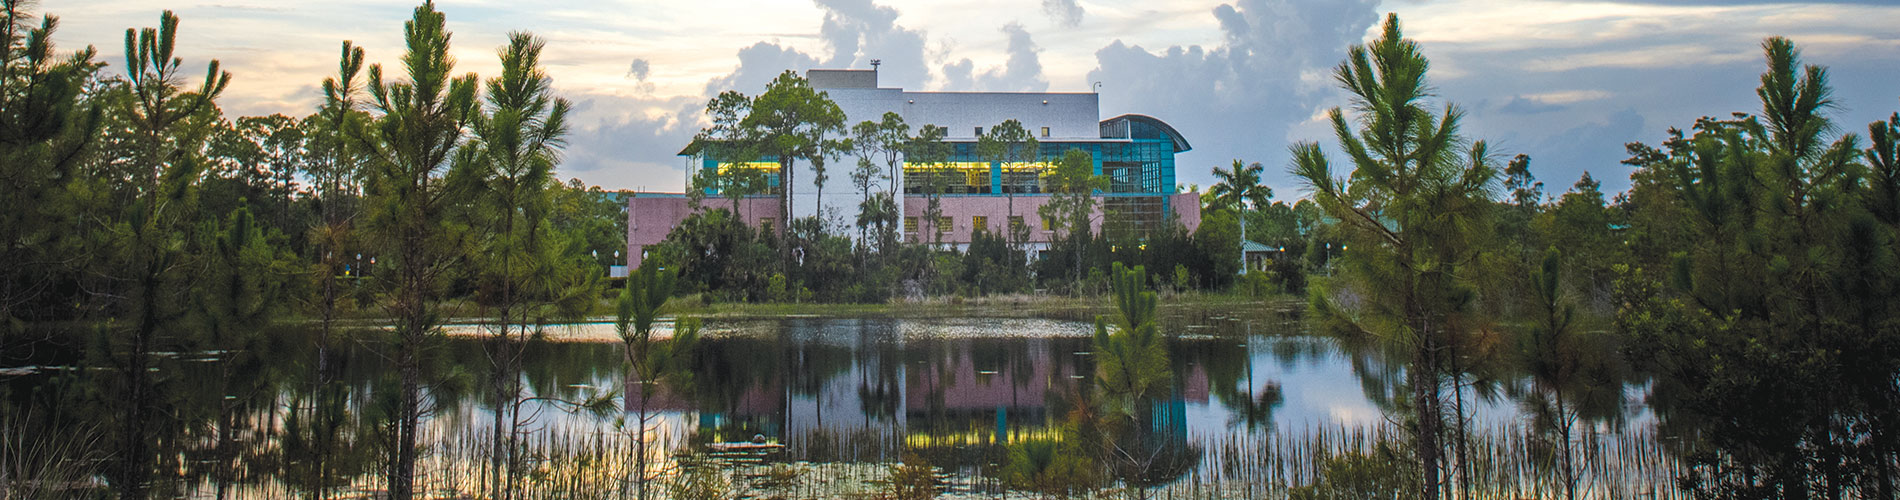 Photo of FGCU Library across the lake